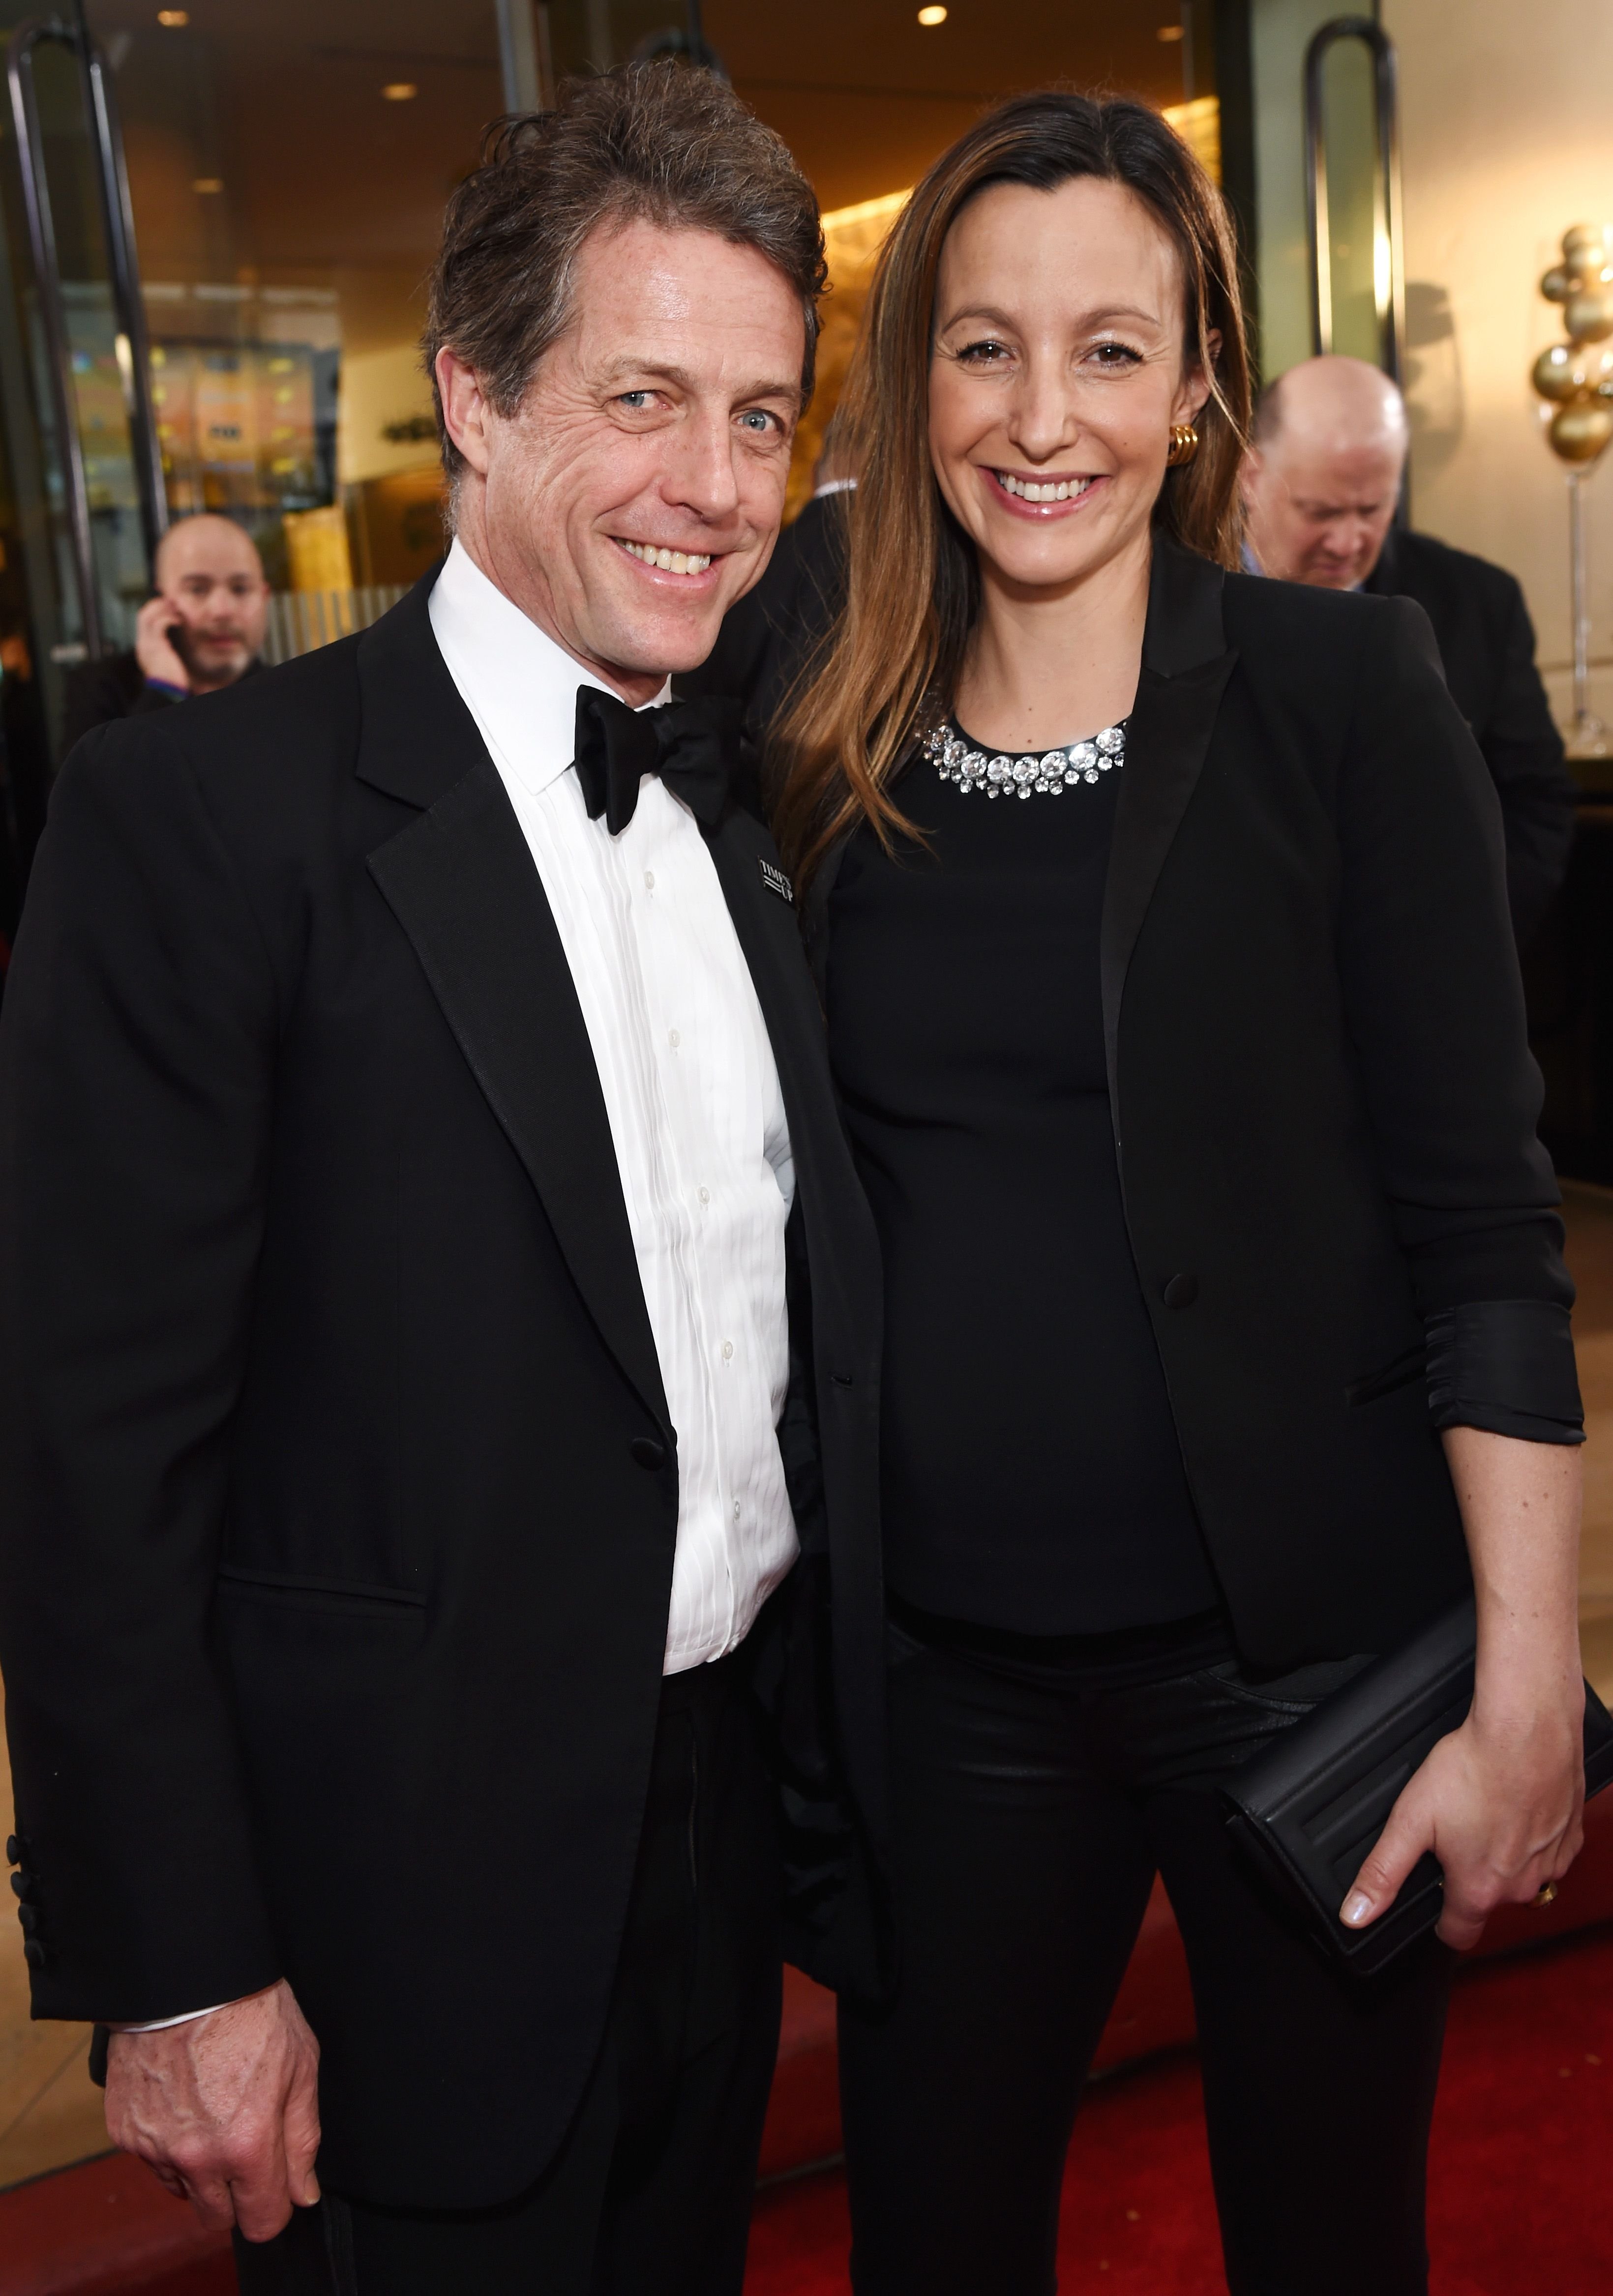 Actor Hugh Grant and Anna Eberstein celebrate The 75th Annual Golden Globe Awards with Moet & Chandon at The Beverly Hilton Hotel on January 7, 2018 | Photo: Getty Images